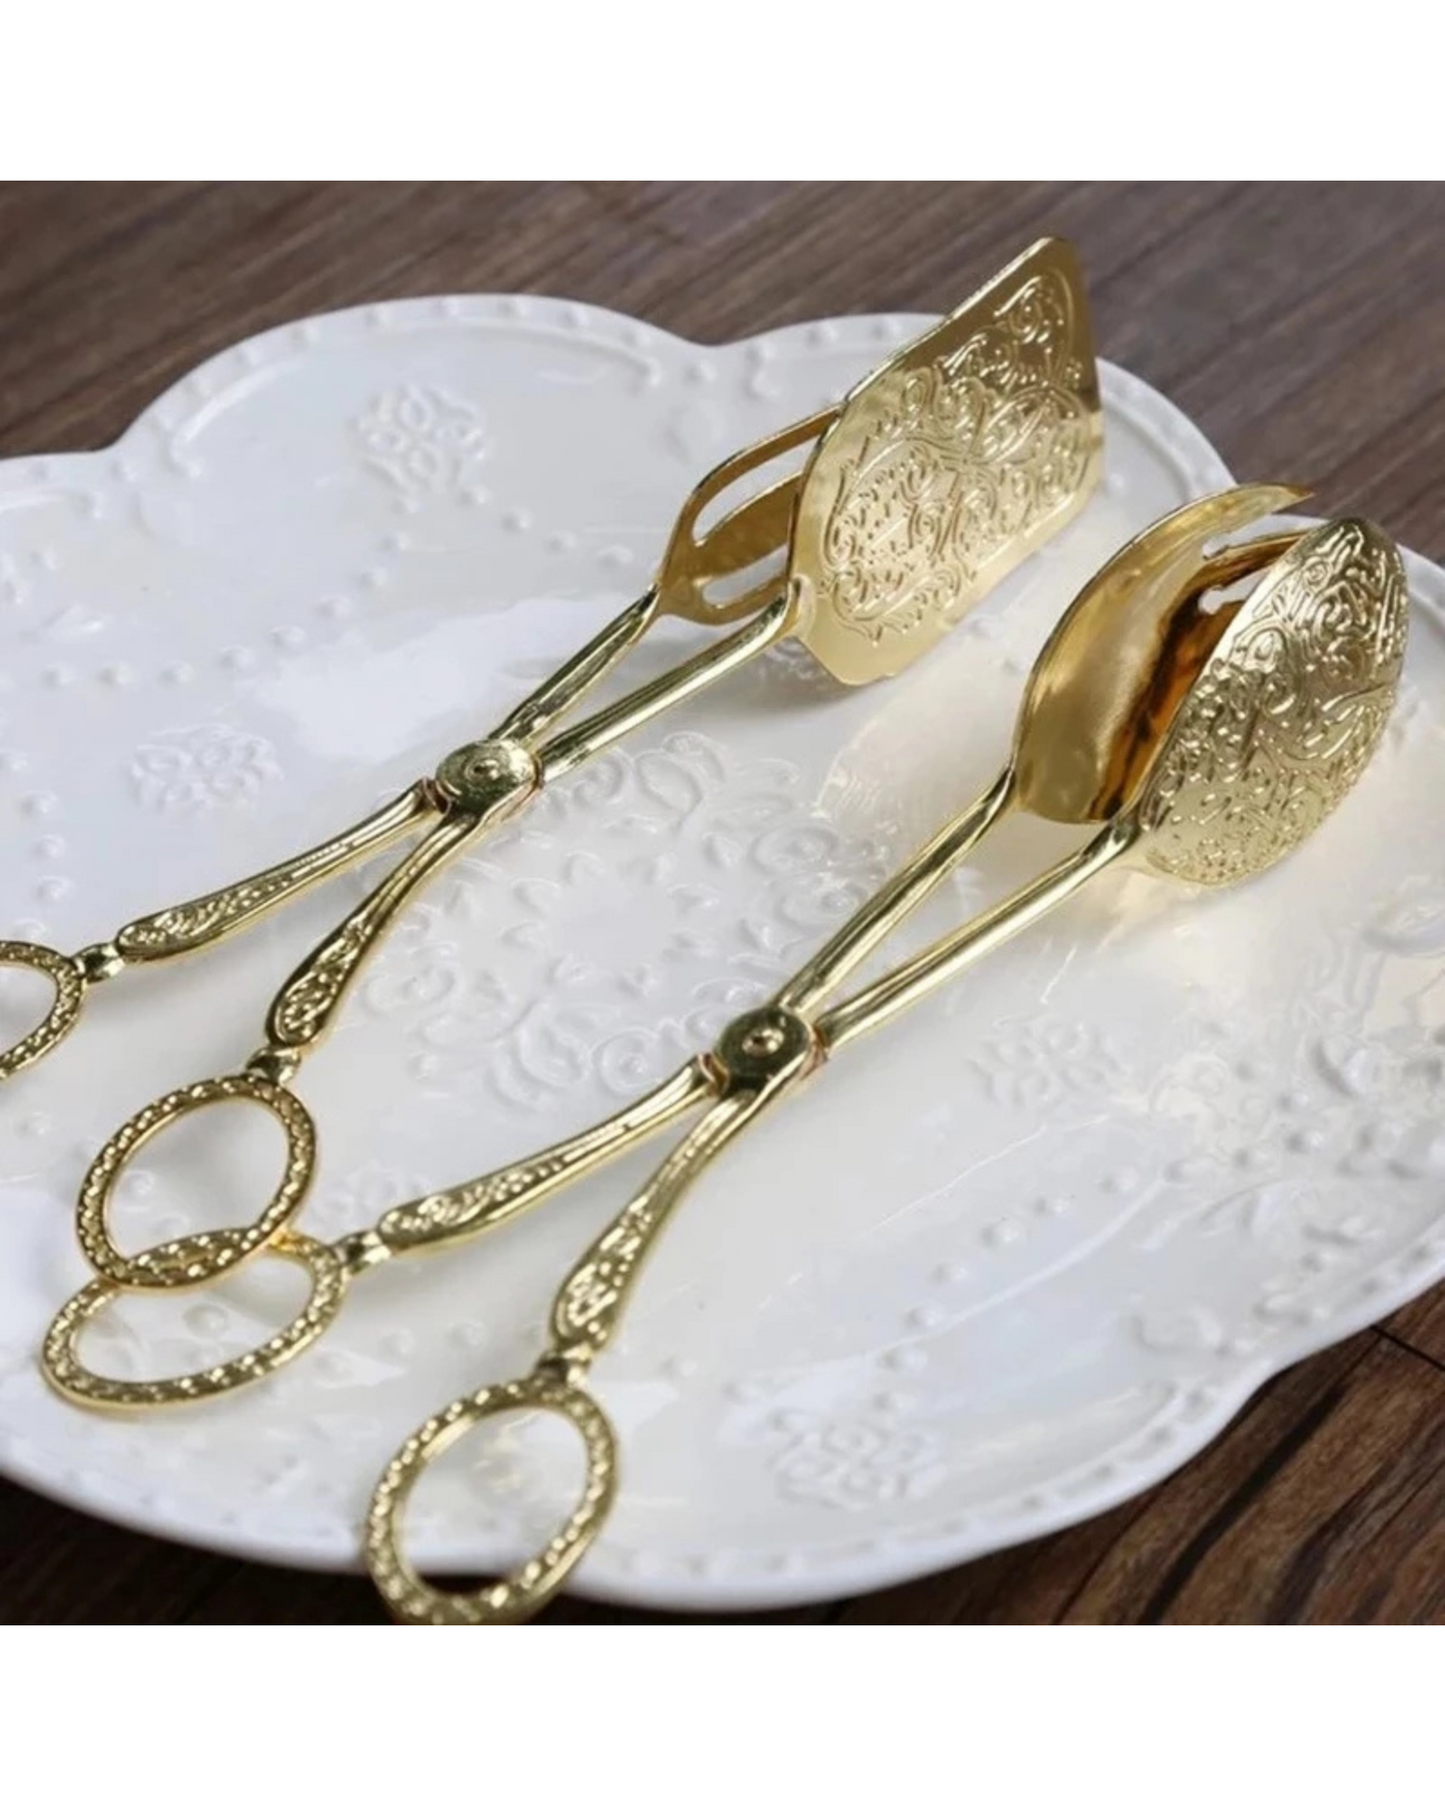 Golden Tongs for Serving- Available In 2 Design